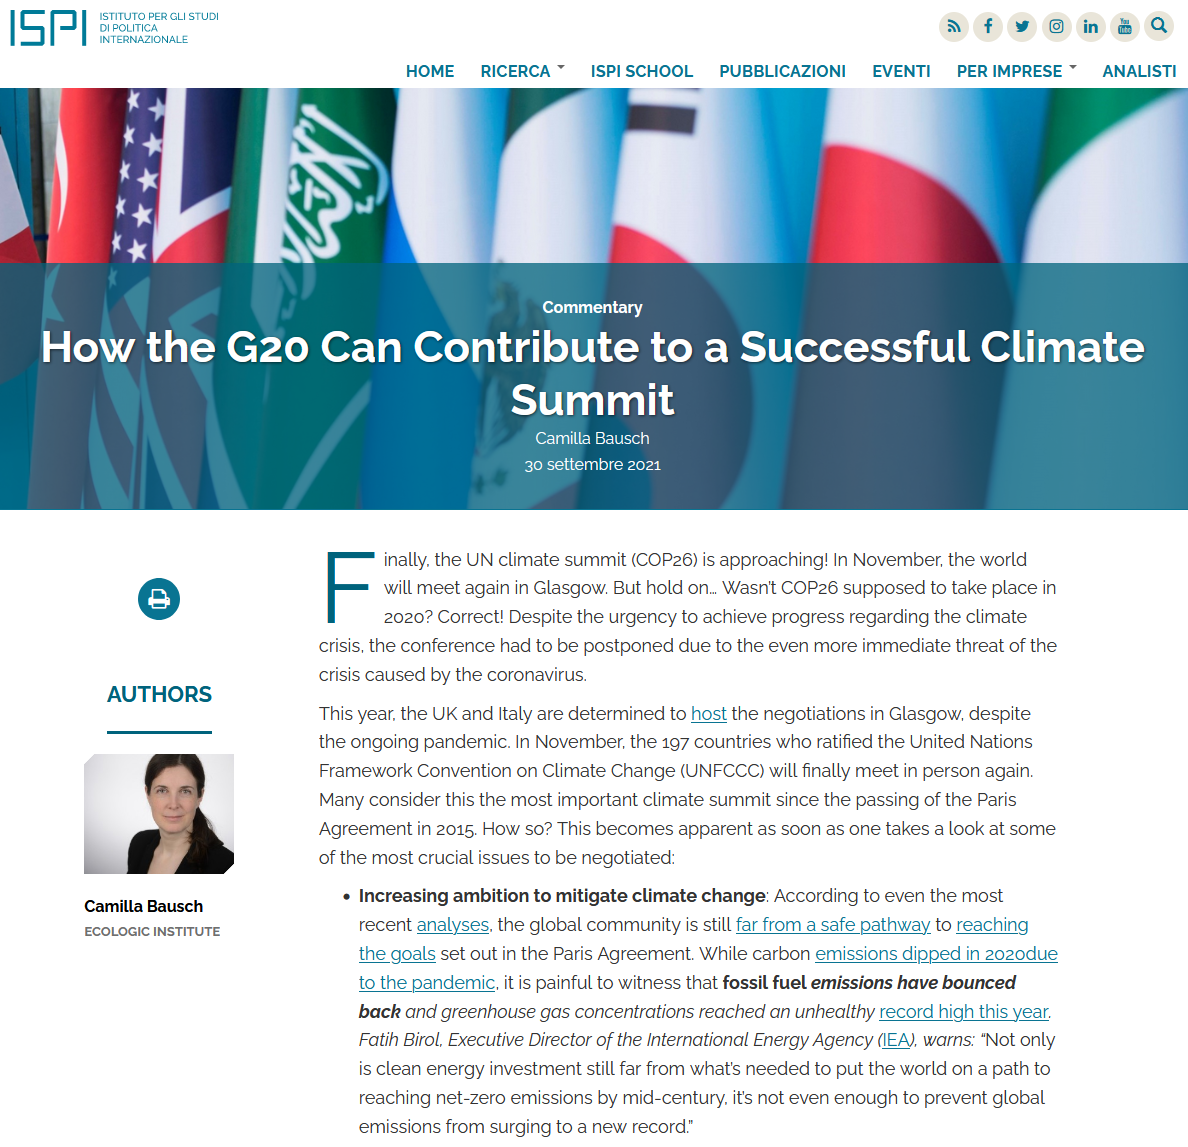 Author: Camilla Bausch, Publication: ISPI Dossier - Climate Change: A Global Fight at a Crossroads